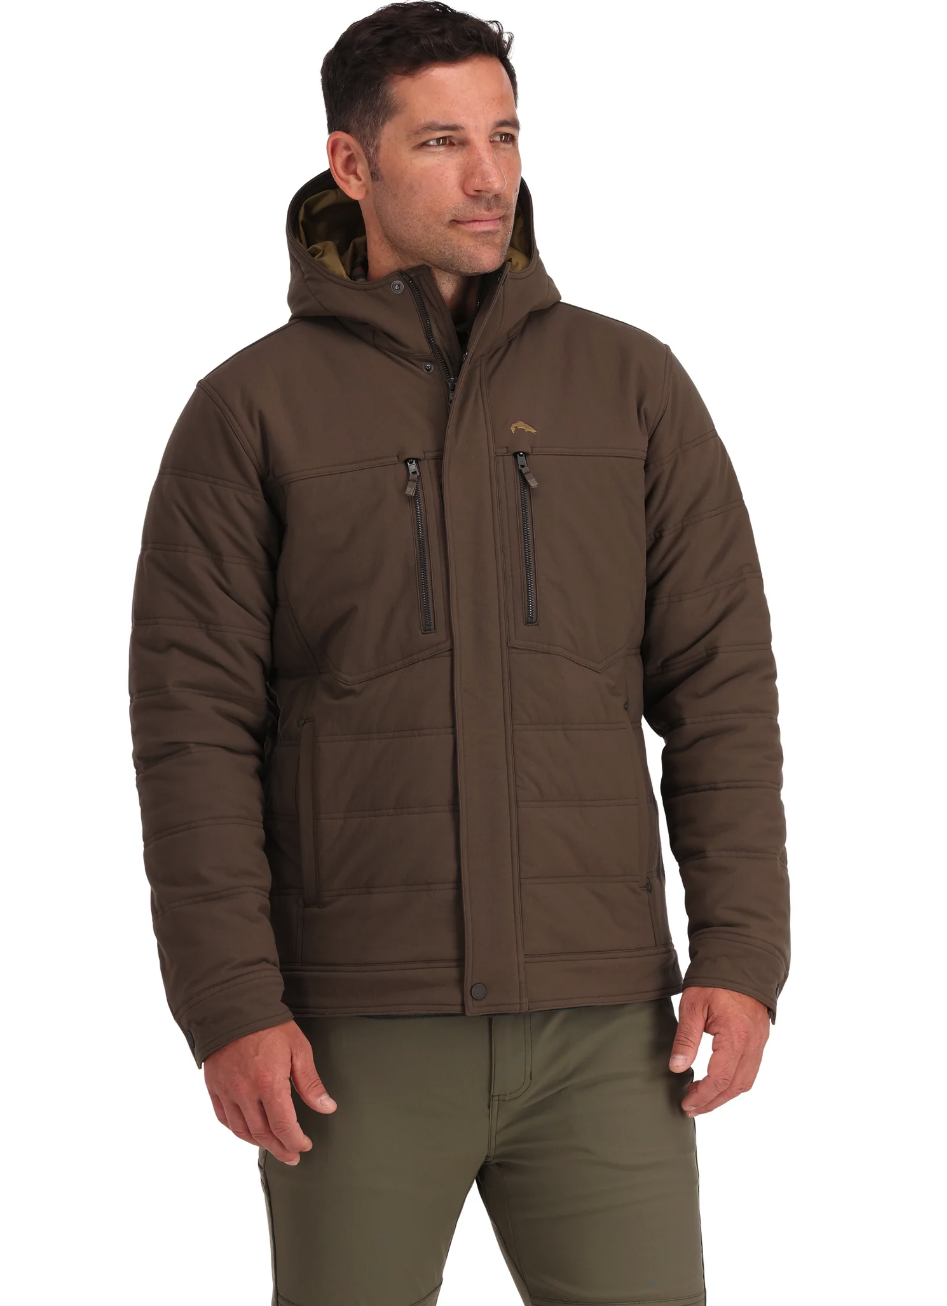 Simms Cardwell Hooded Jacket | Buy Simms Fishing Jackets Online | Simms ...